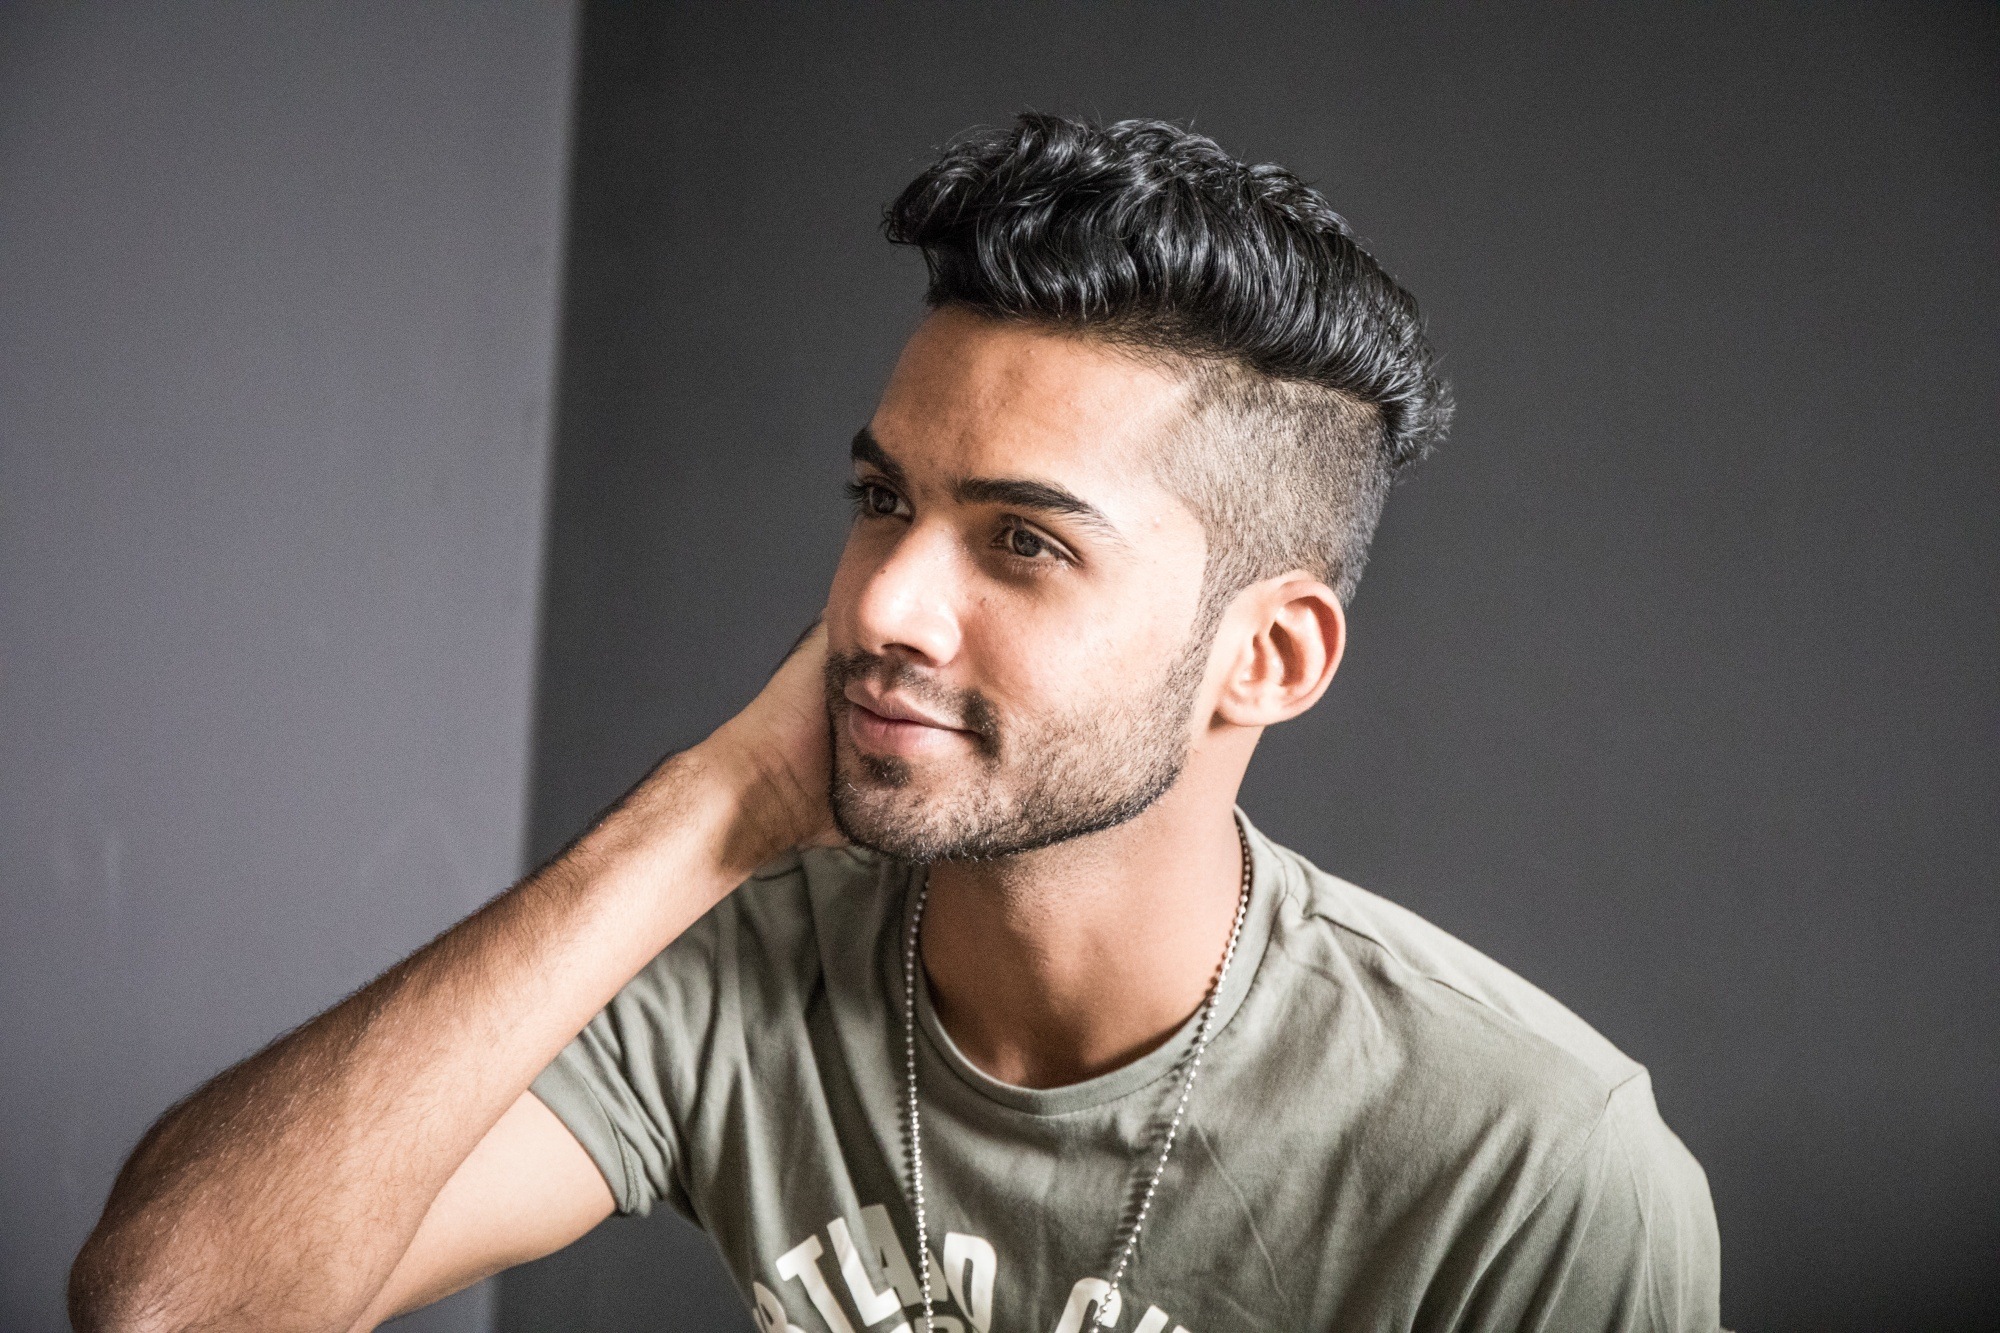 Haircuts for men with wavy hair: Asian man with wavy hair and faded haircut